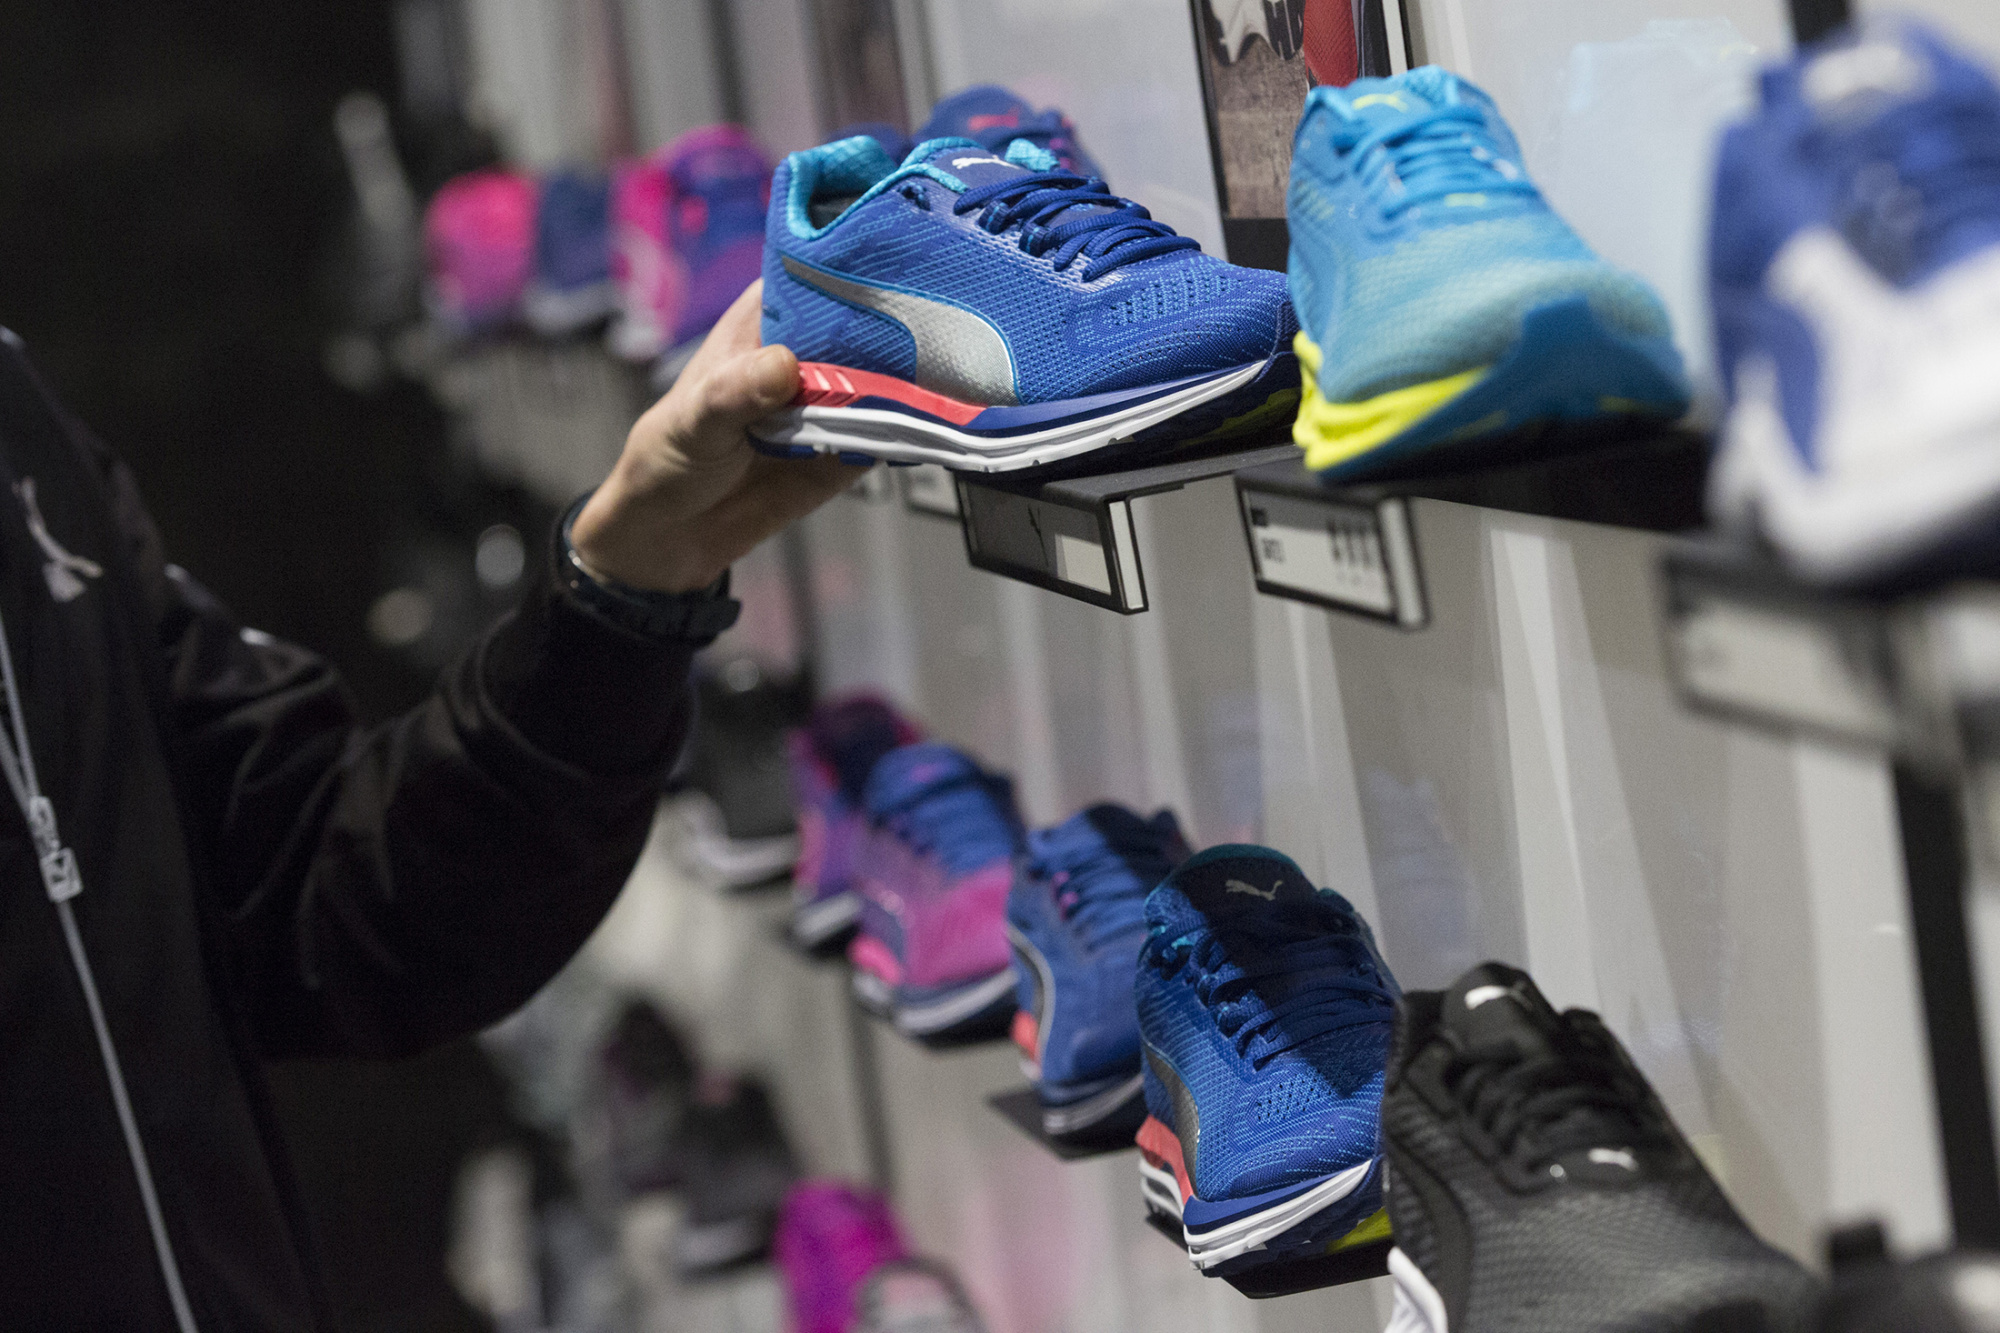 Watch Kering Said to Be Open to Selling Puma - Bloomberg